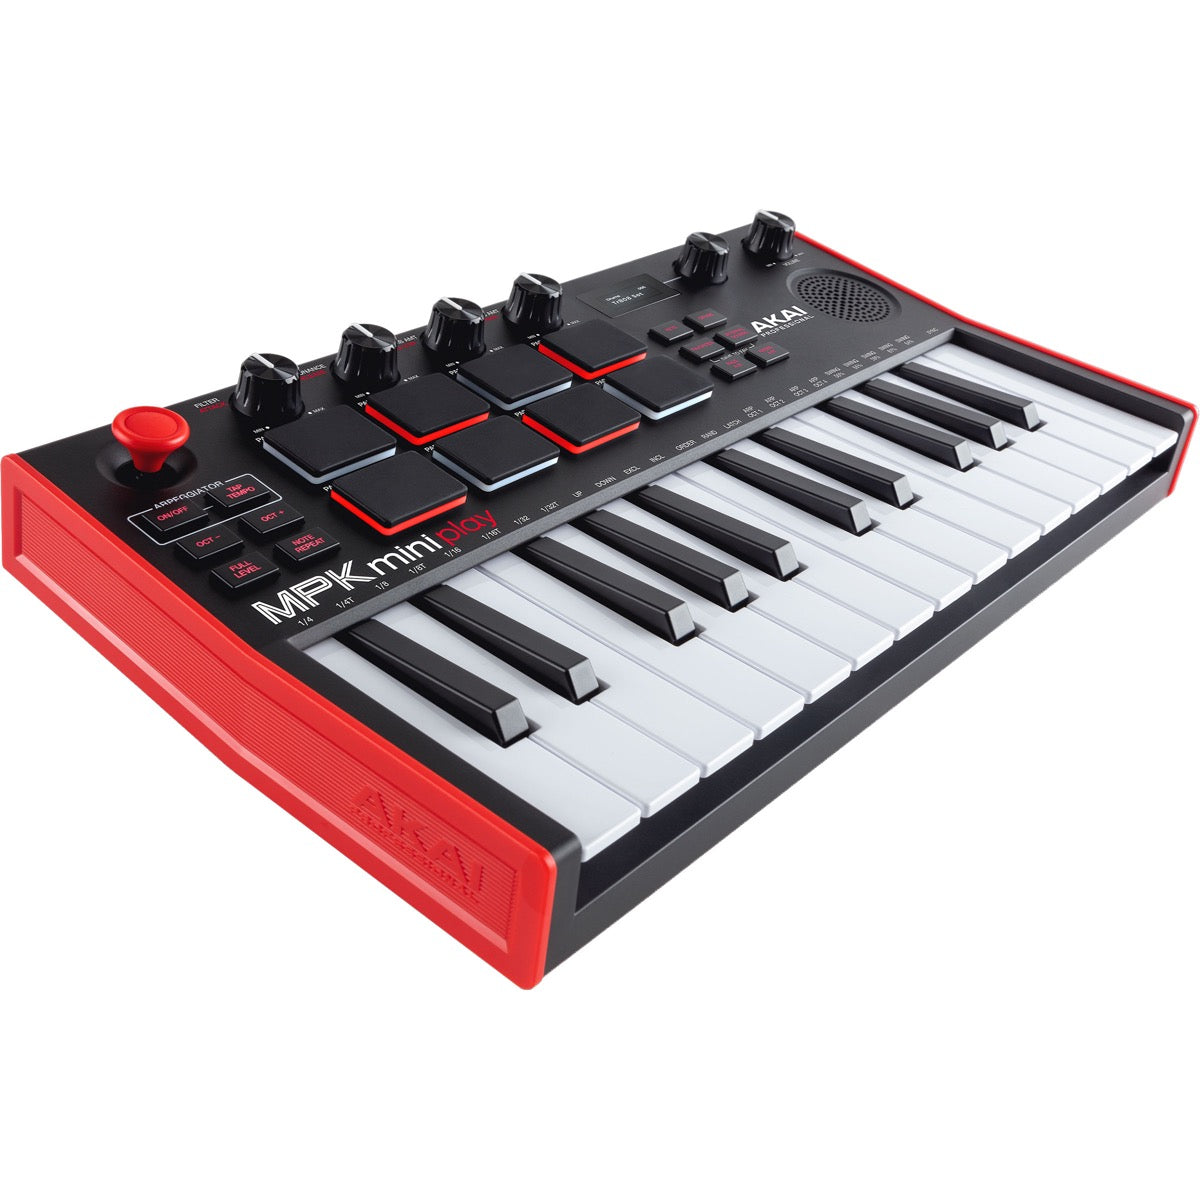 Akai Professional MPK Mini Play Mk3 Keyboard with Built-In Speaker CABLE KIT